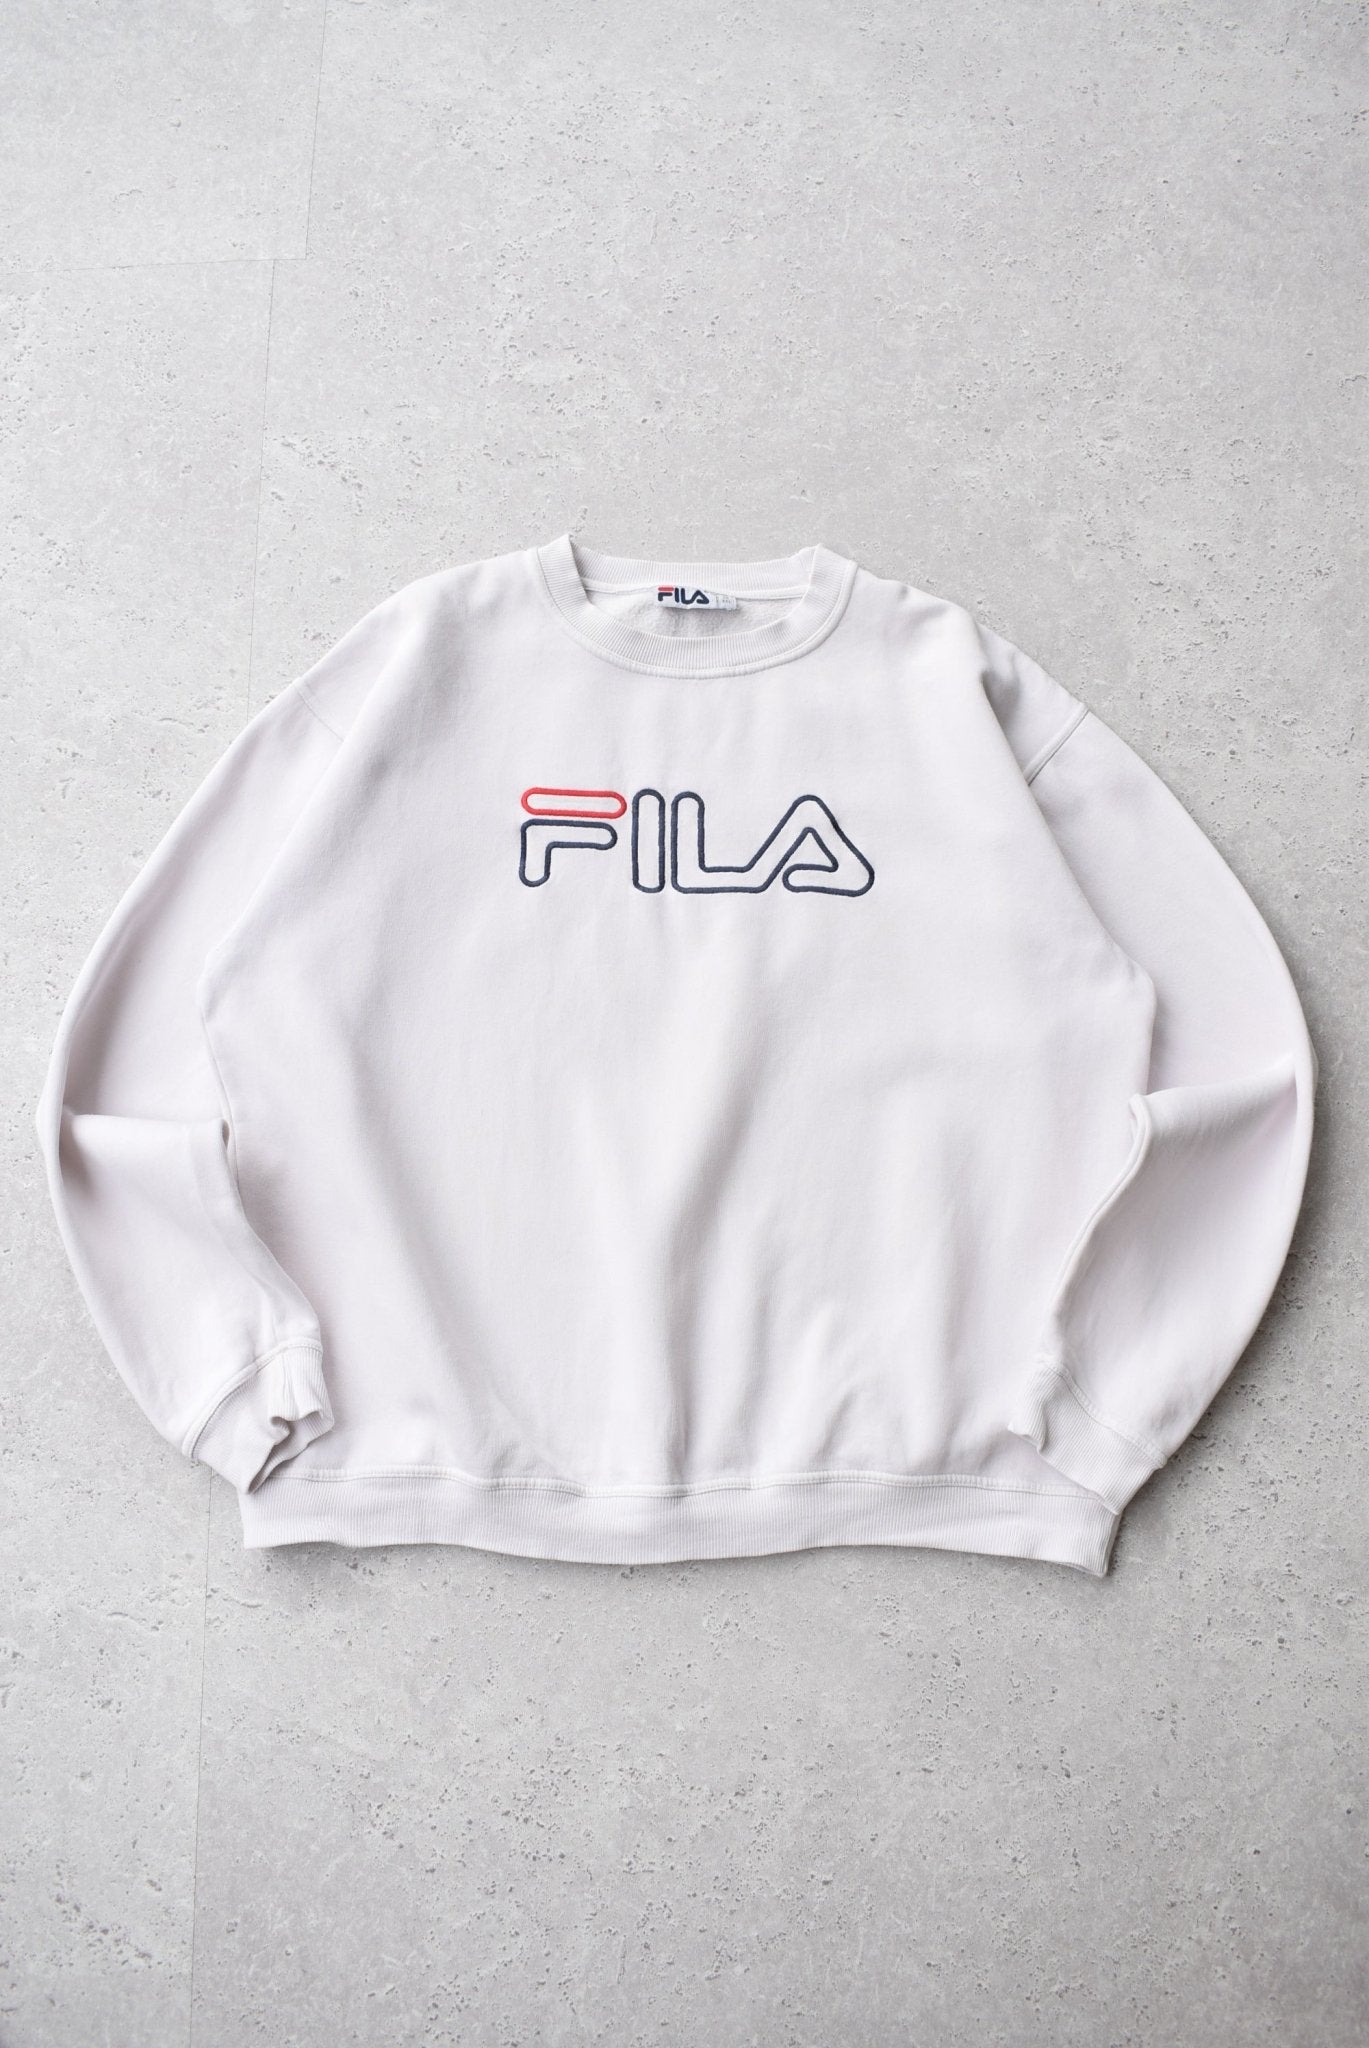 Vintage 90s Fila Spellout Embroidered Sweater (XL/XXL) - Retrospective Store